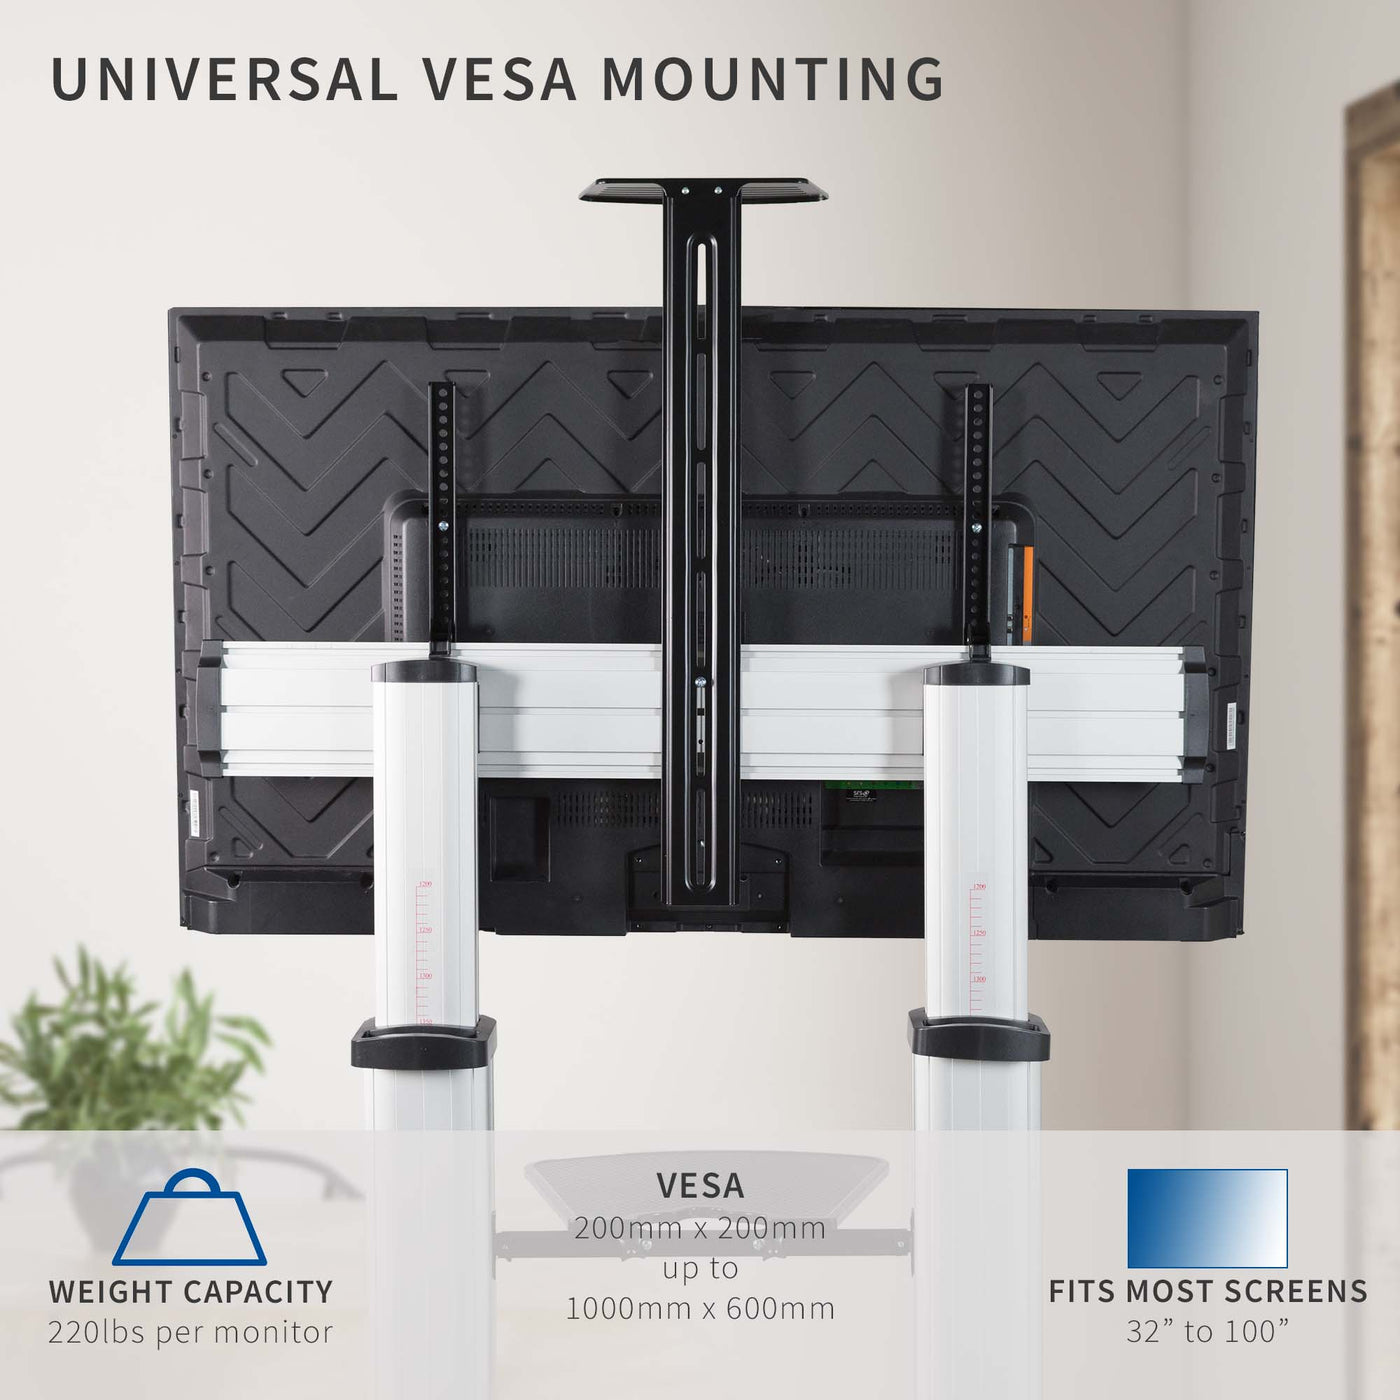 Universal VESA mounting to fit most TVs on the market.